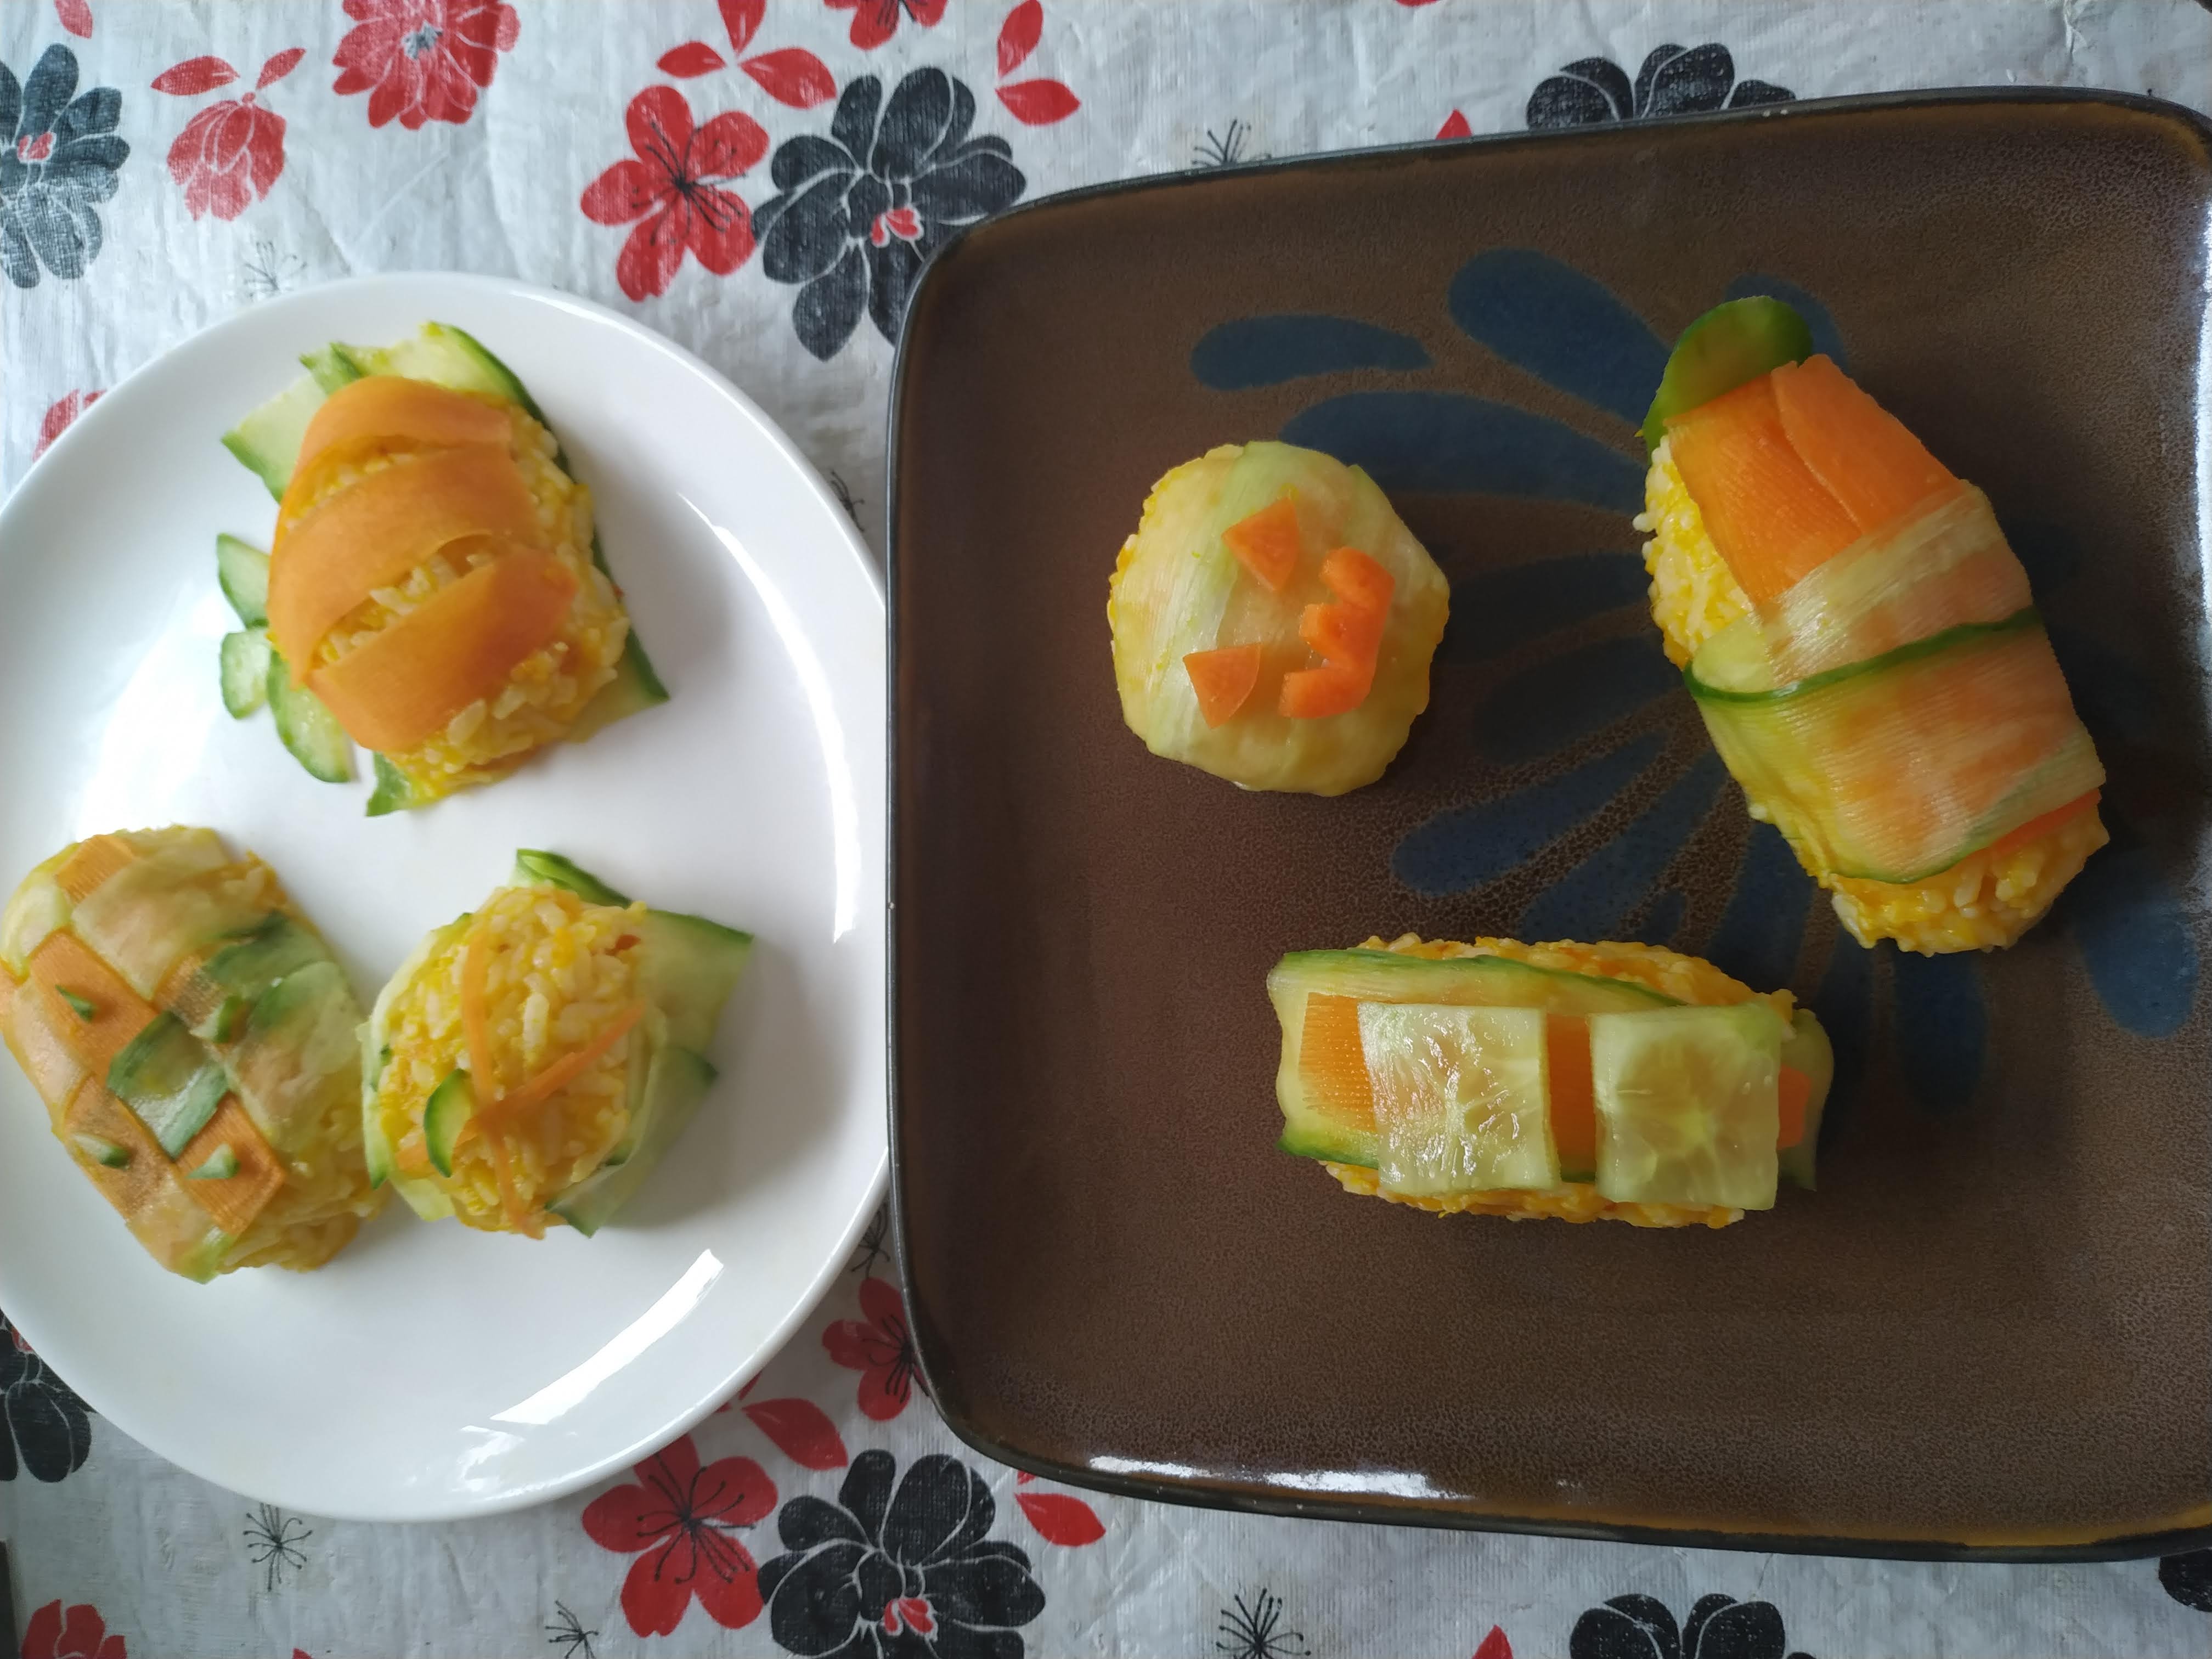 A plate of halloween themed sushi with pumpkin, carrot, rice, and cucumber